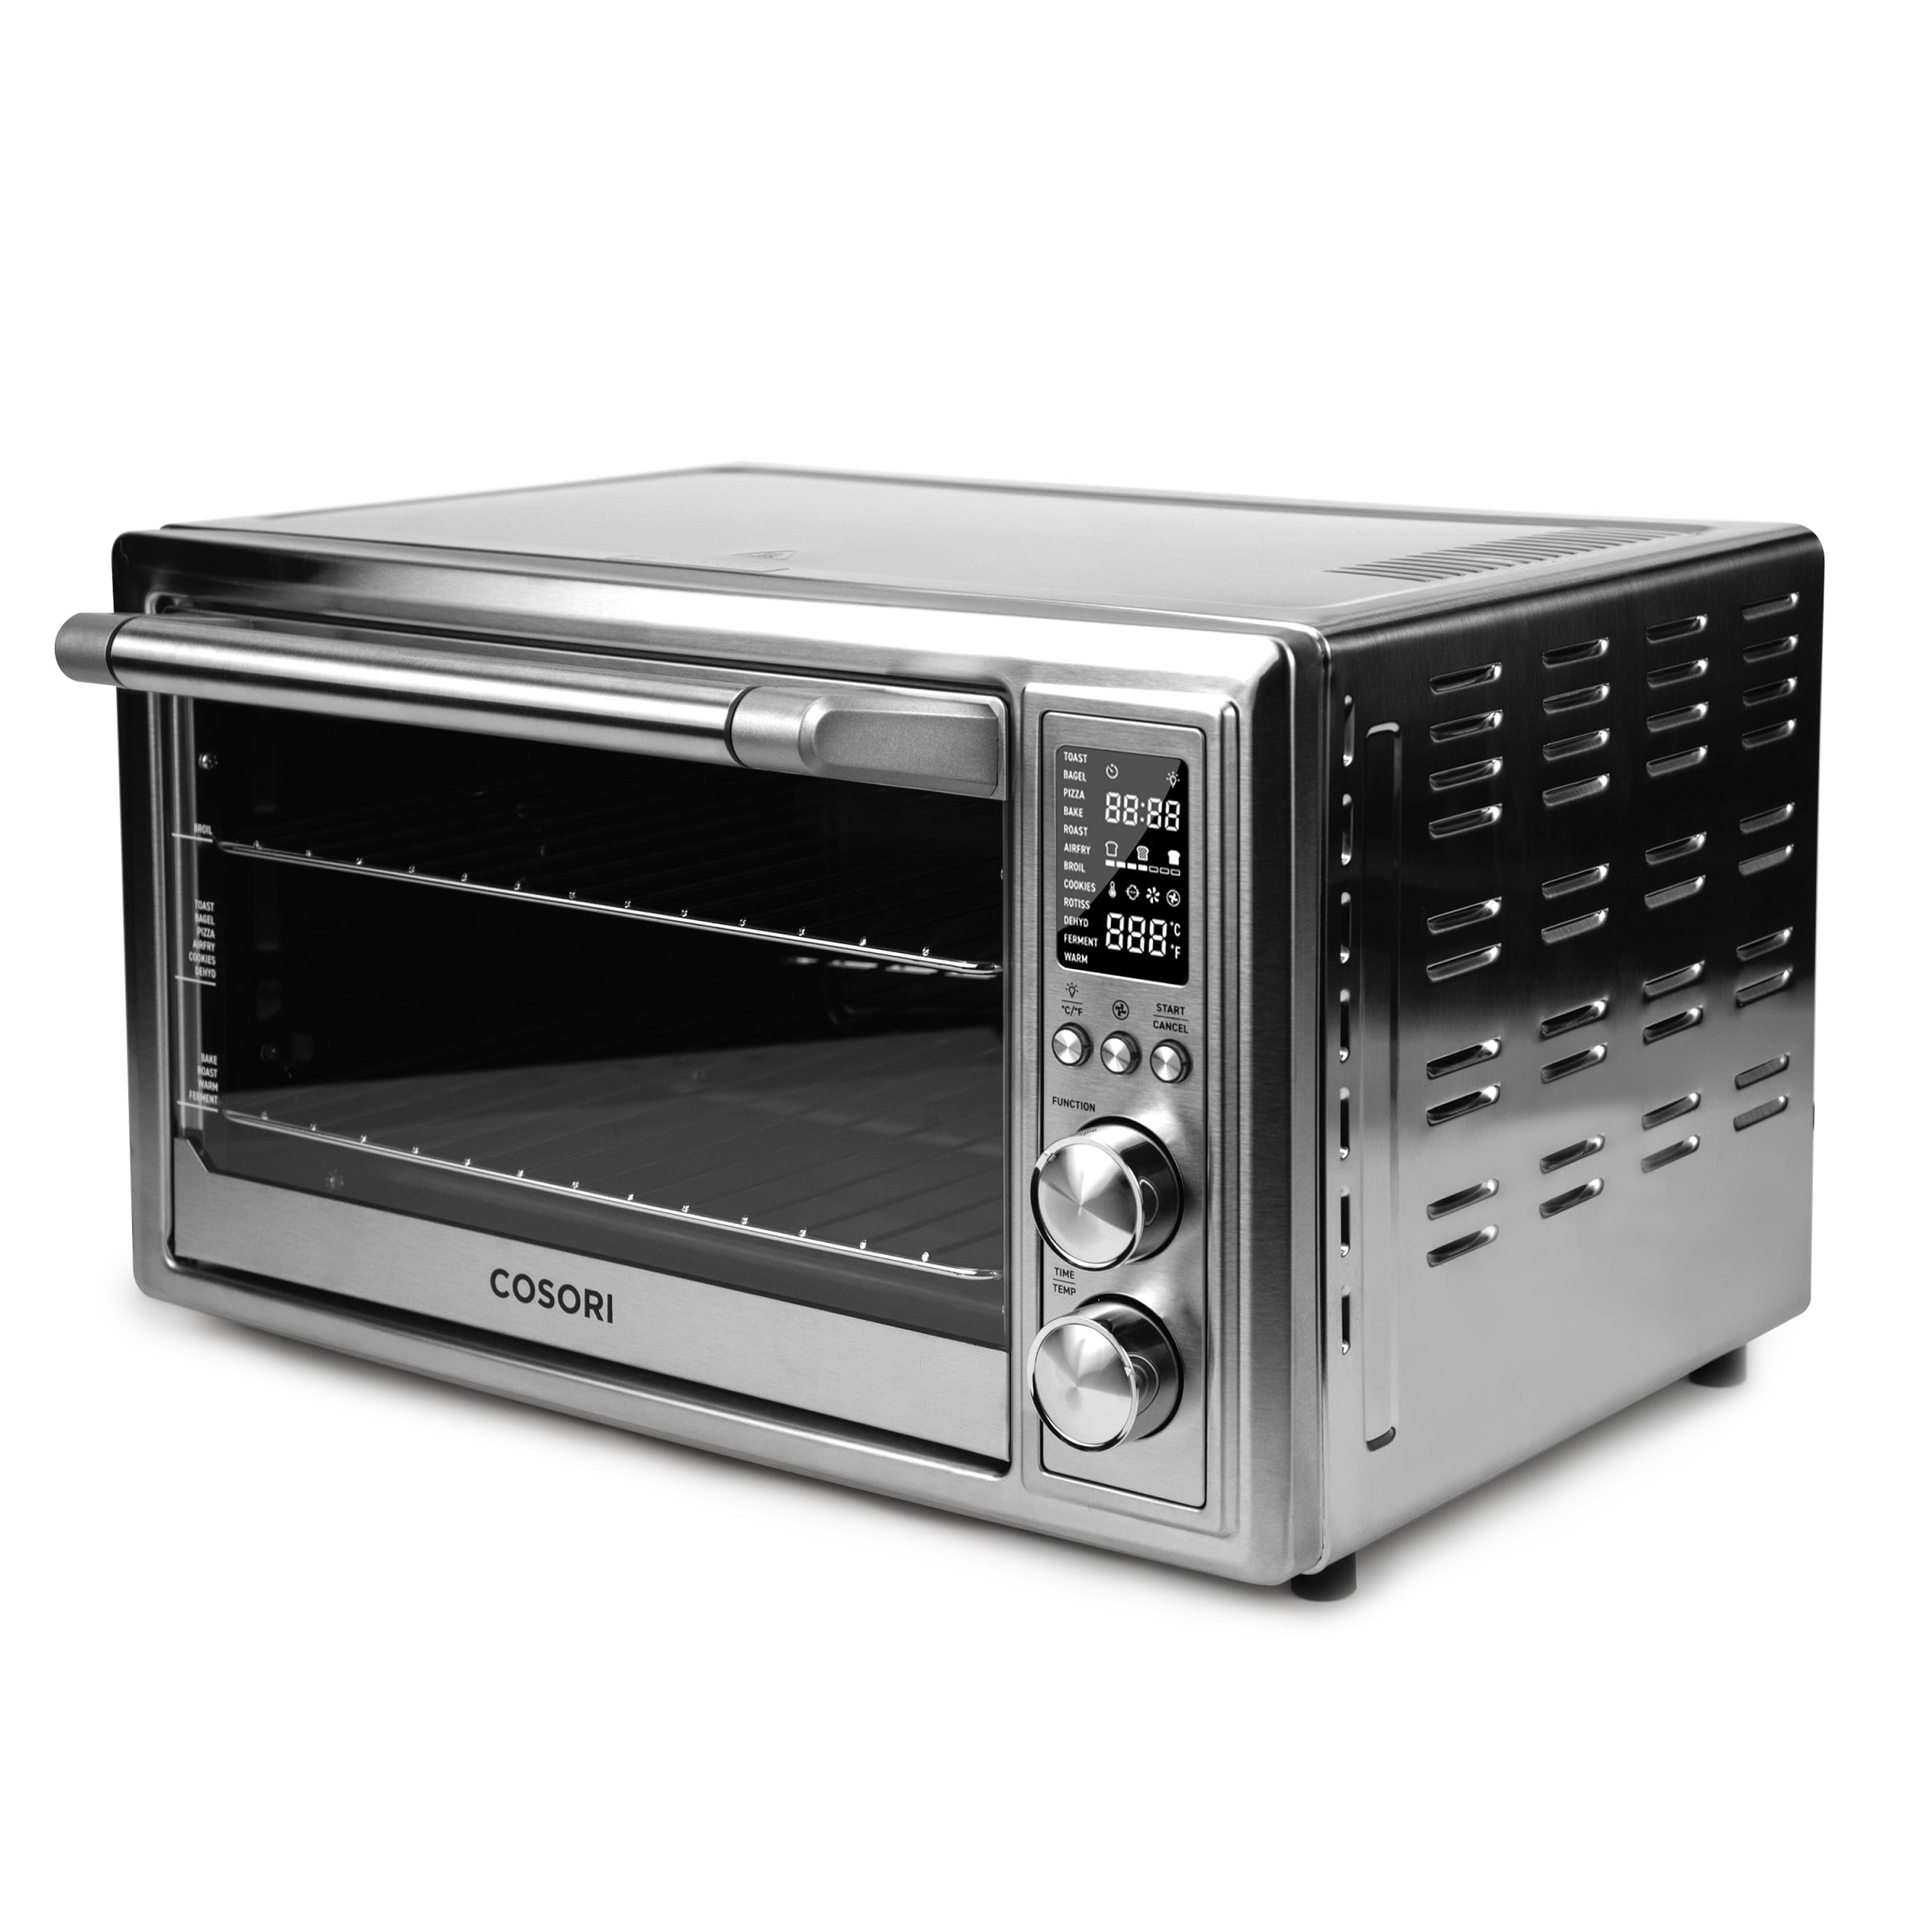 COSORI Toaster Oven Air Fryer Combo for Sale in Phoenix, AZ